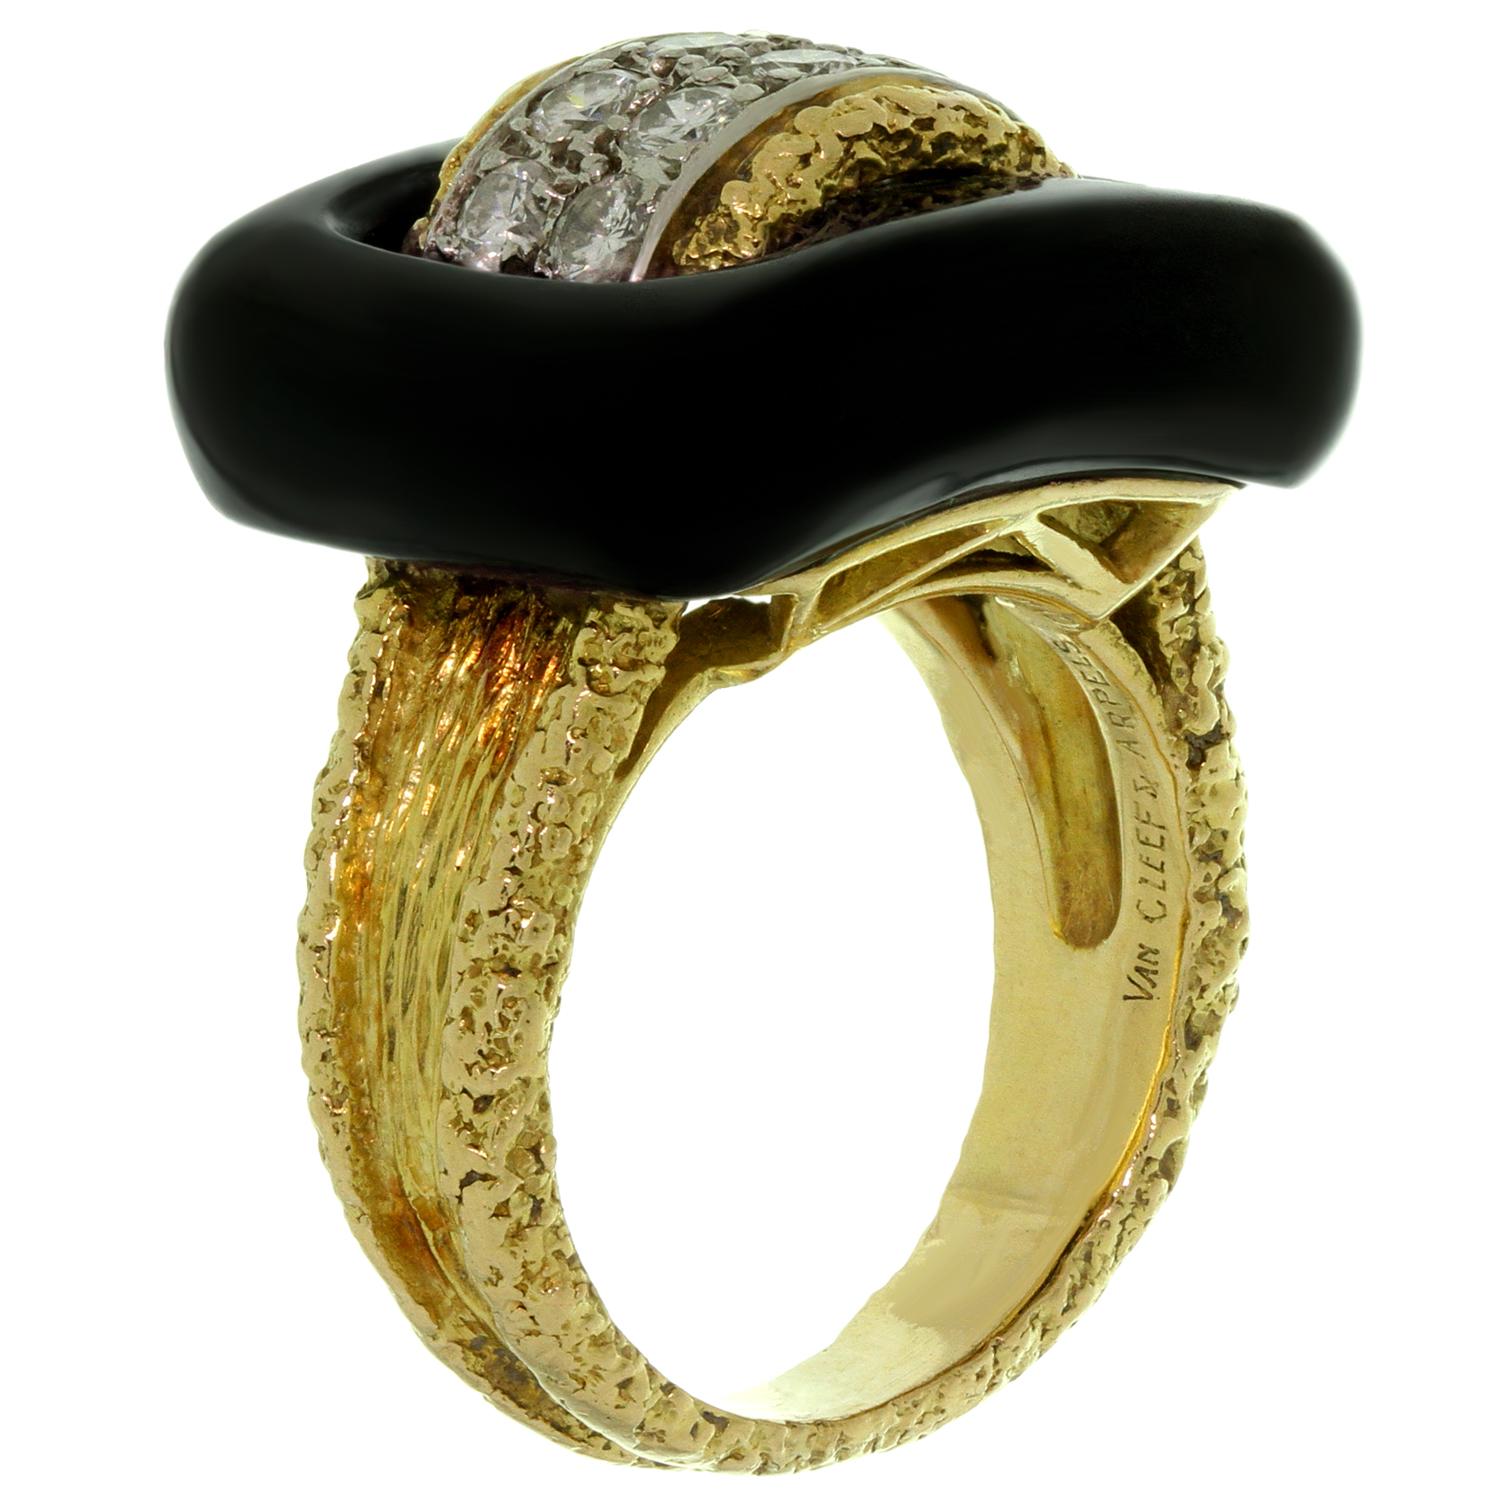 Brilliant Cut Van Cleef & Arpels Diamond Black Onyx Textured Yellow Gold Ring For Sale